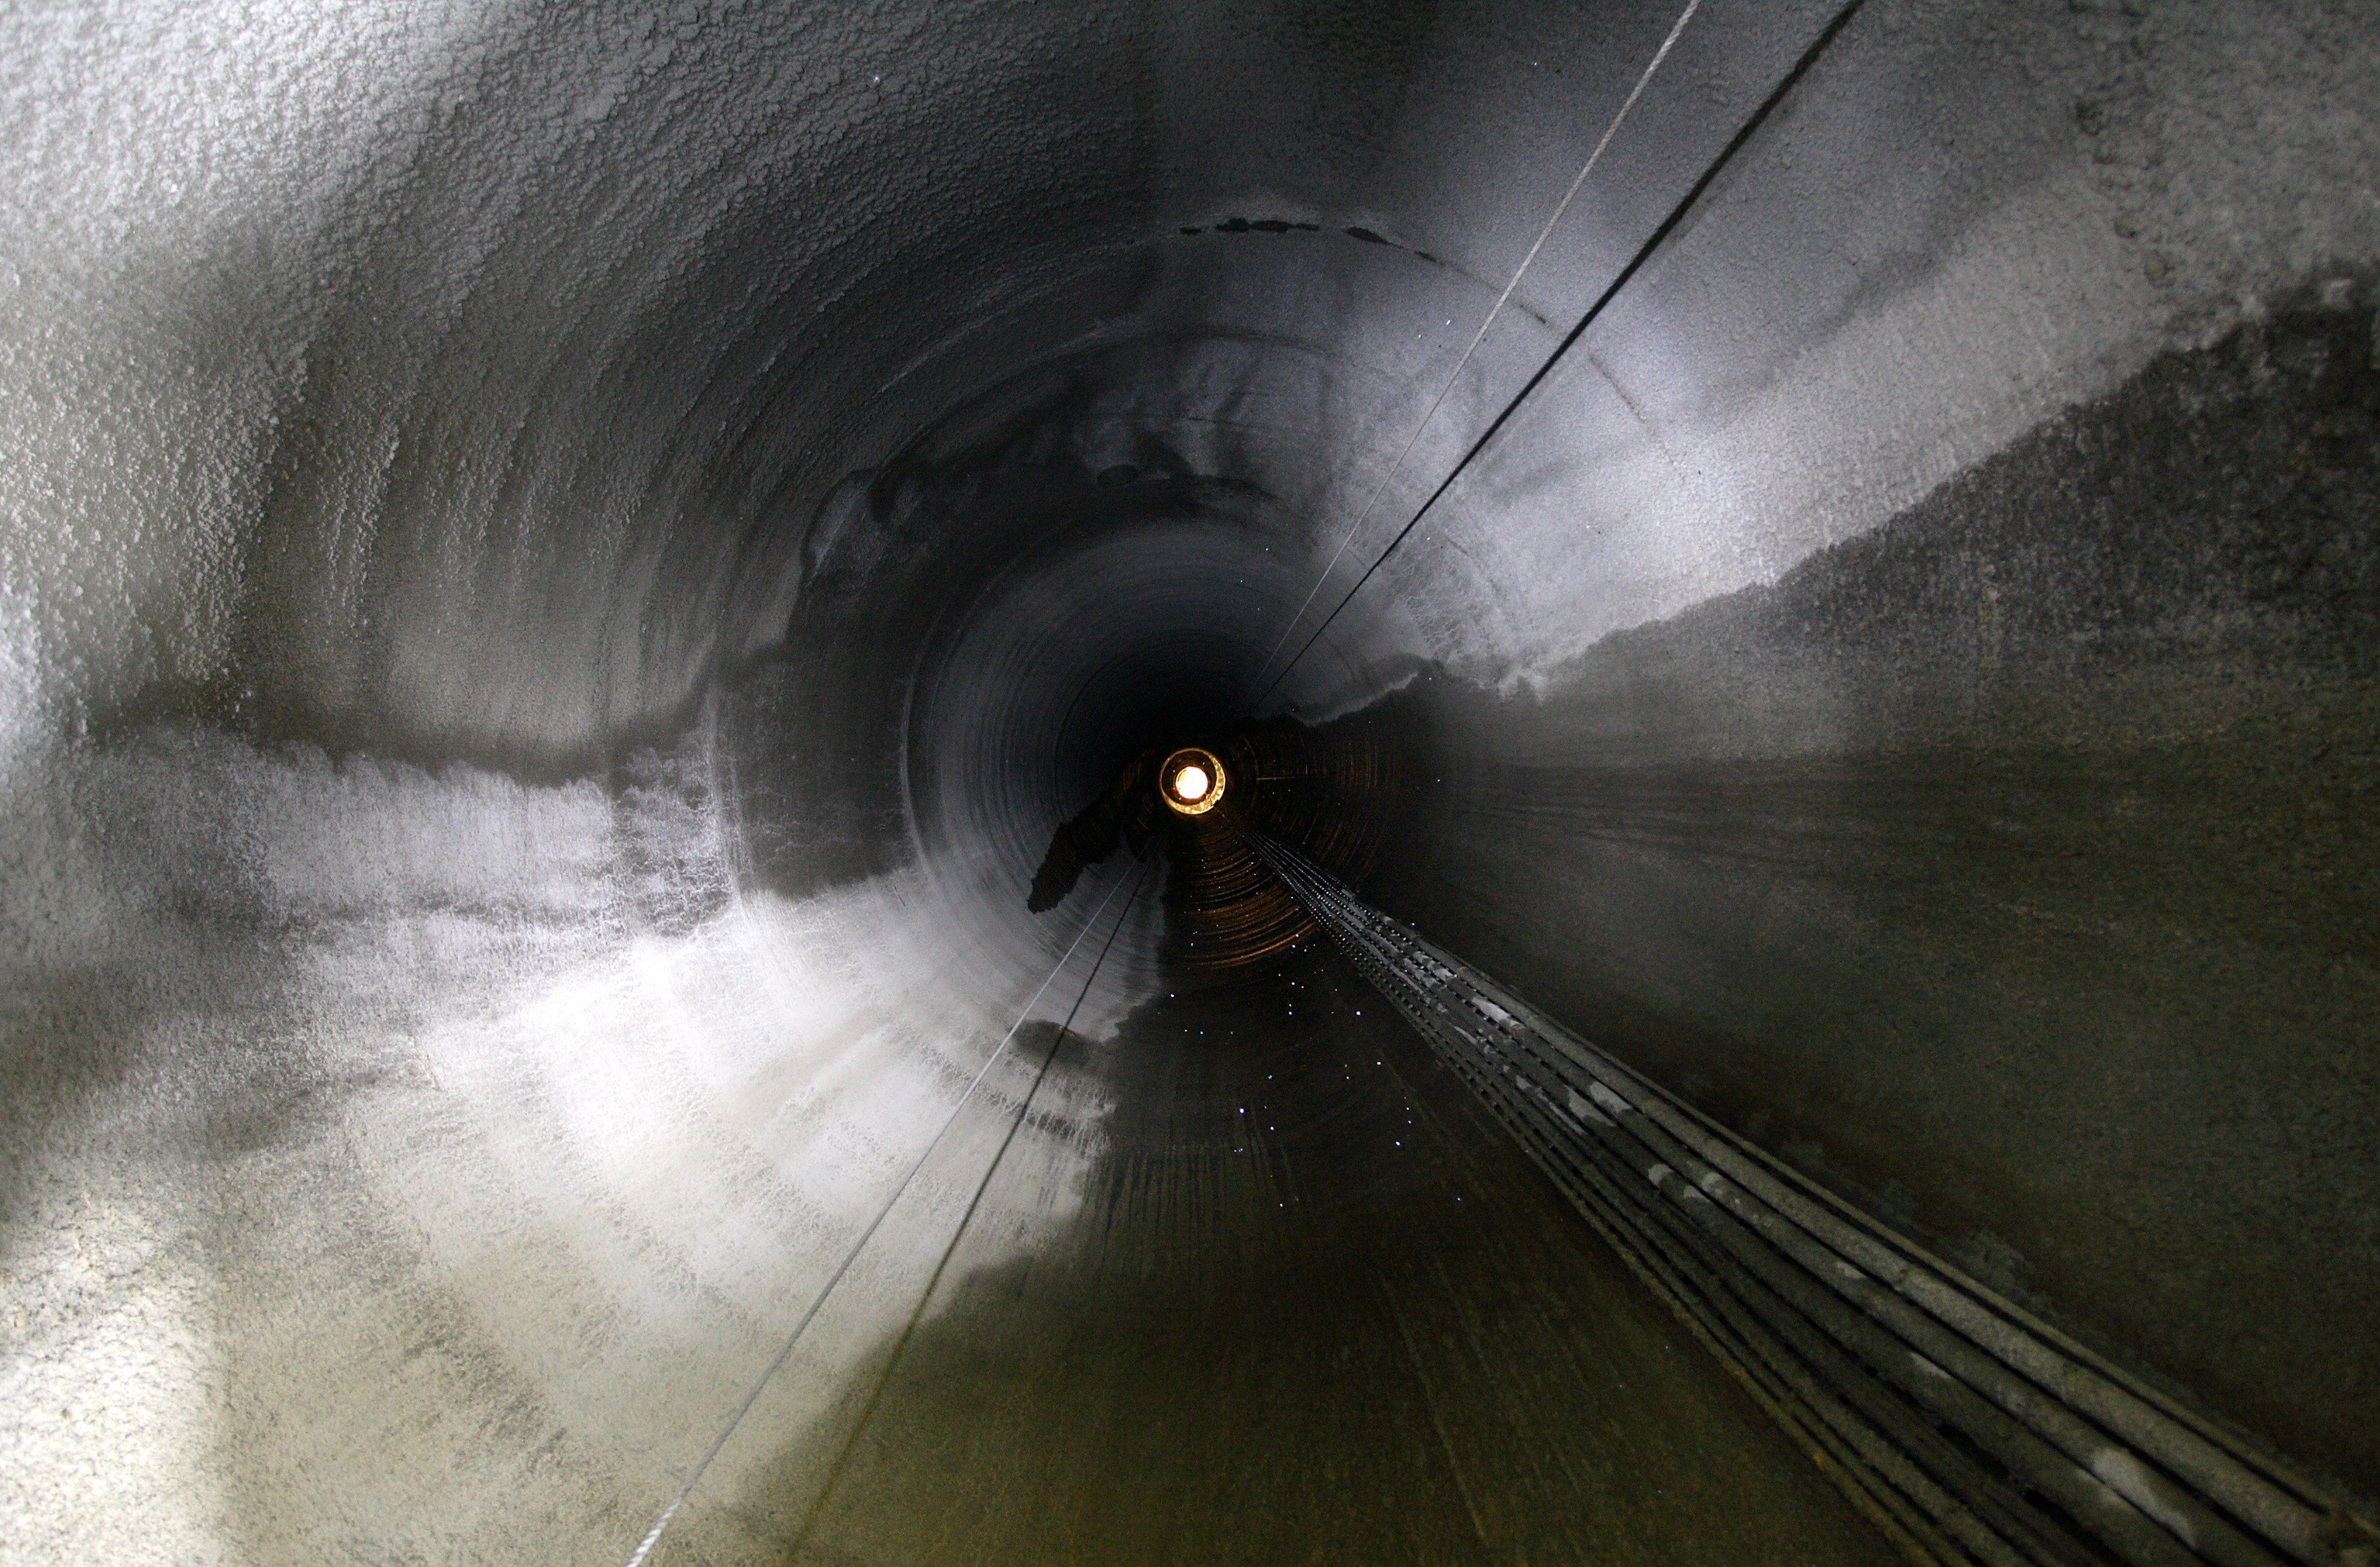 scandinavia, Finland, Nuclear, Architecture, Deposit, Material, Tunnel, Europe Wallpaper